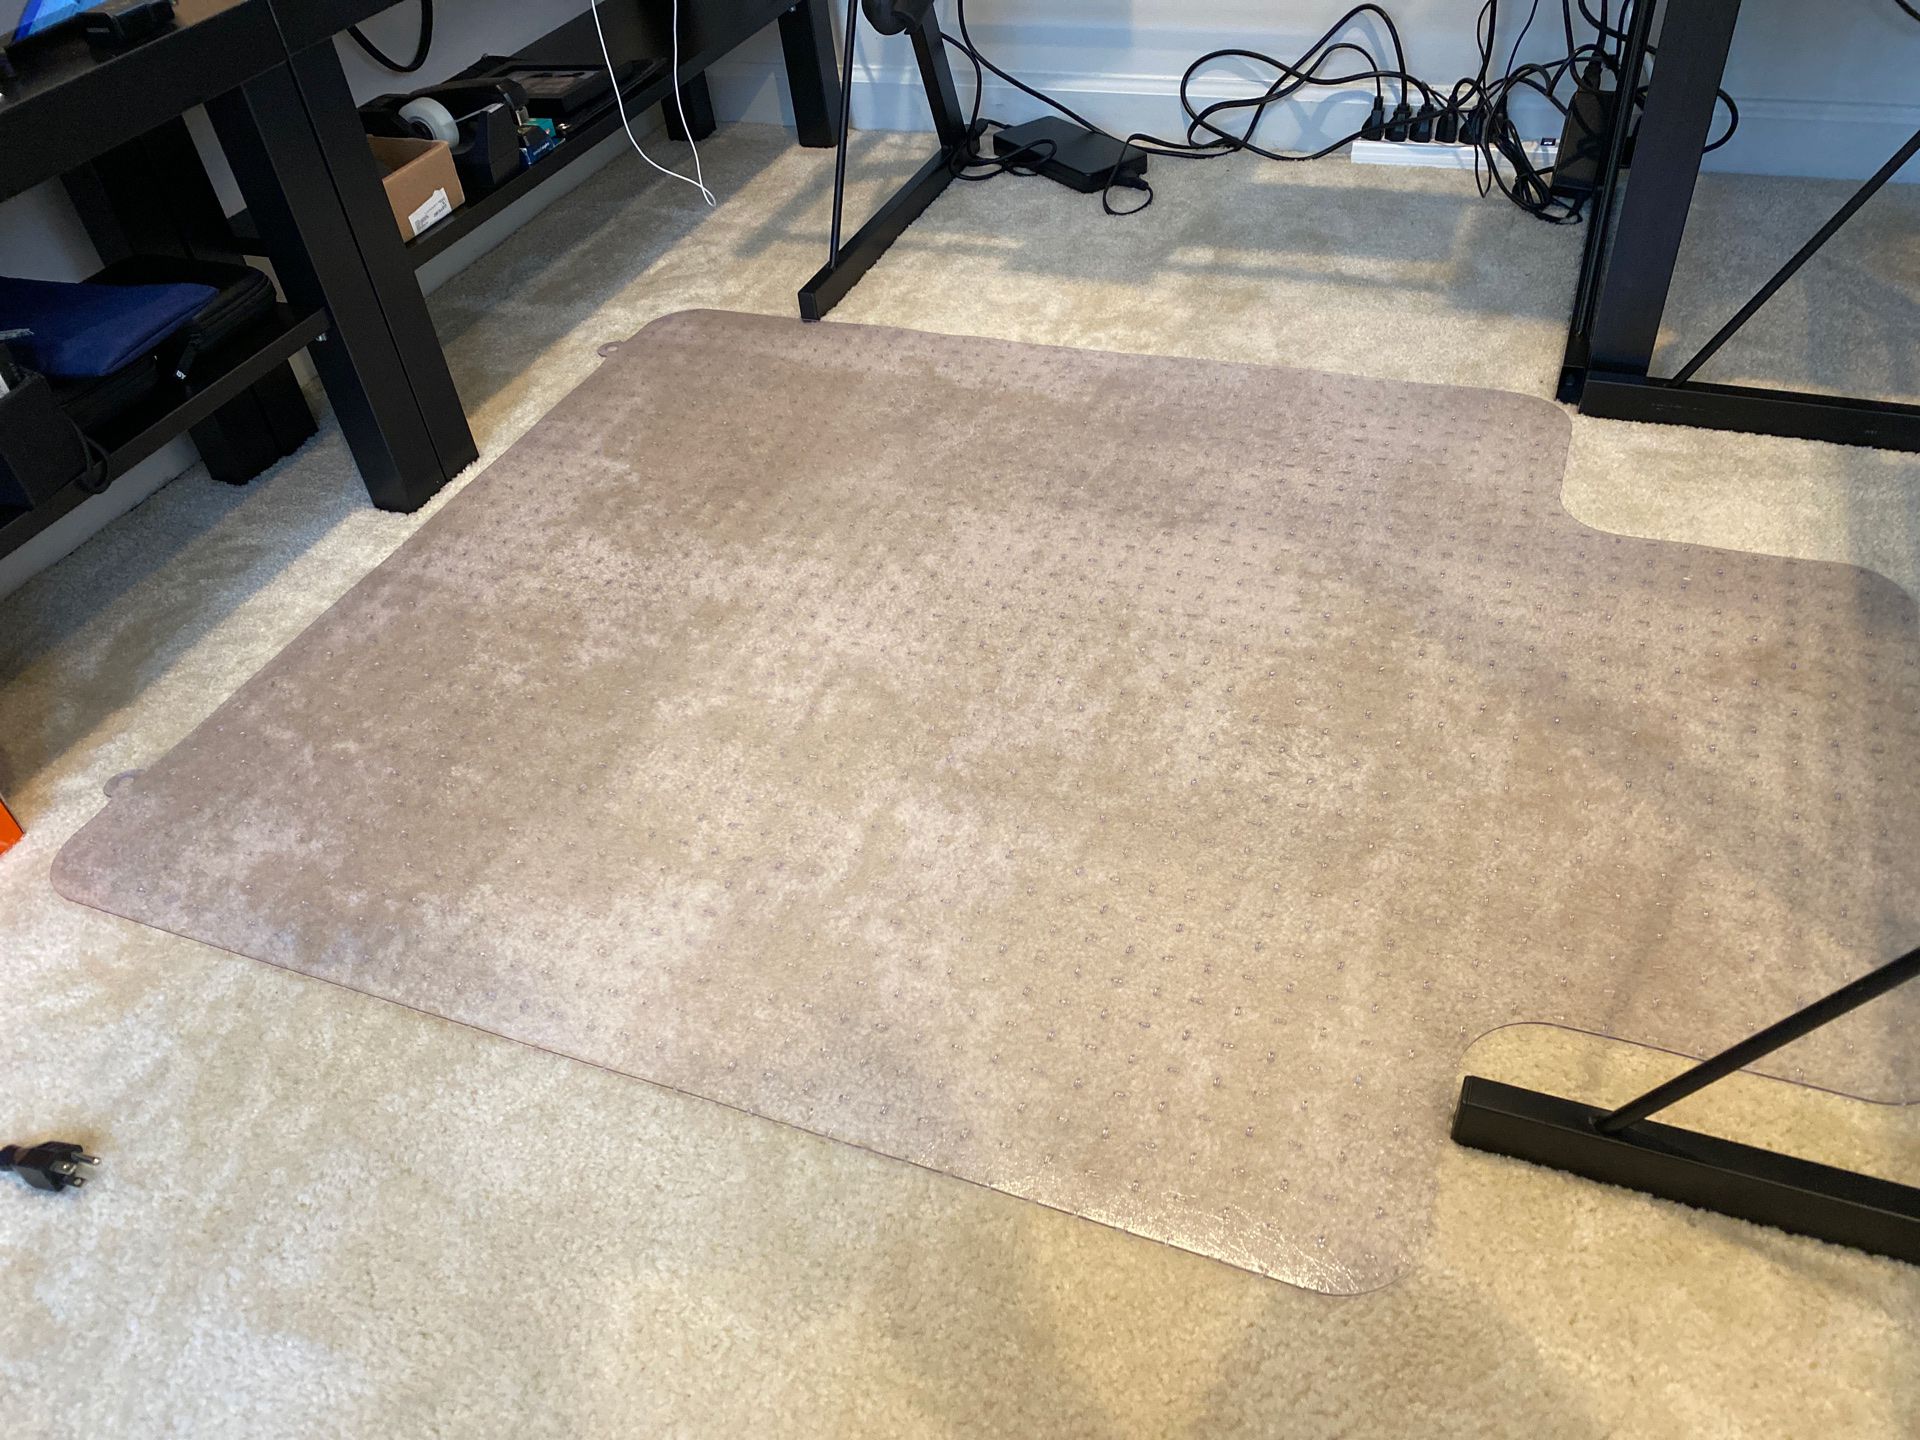 Staples 36/48 Chair Mat- Low Pile with Lip